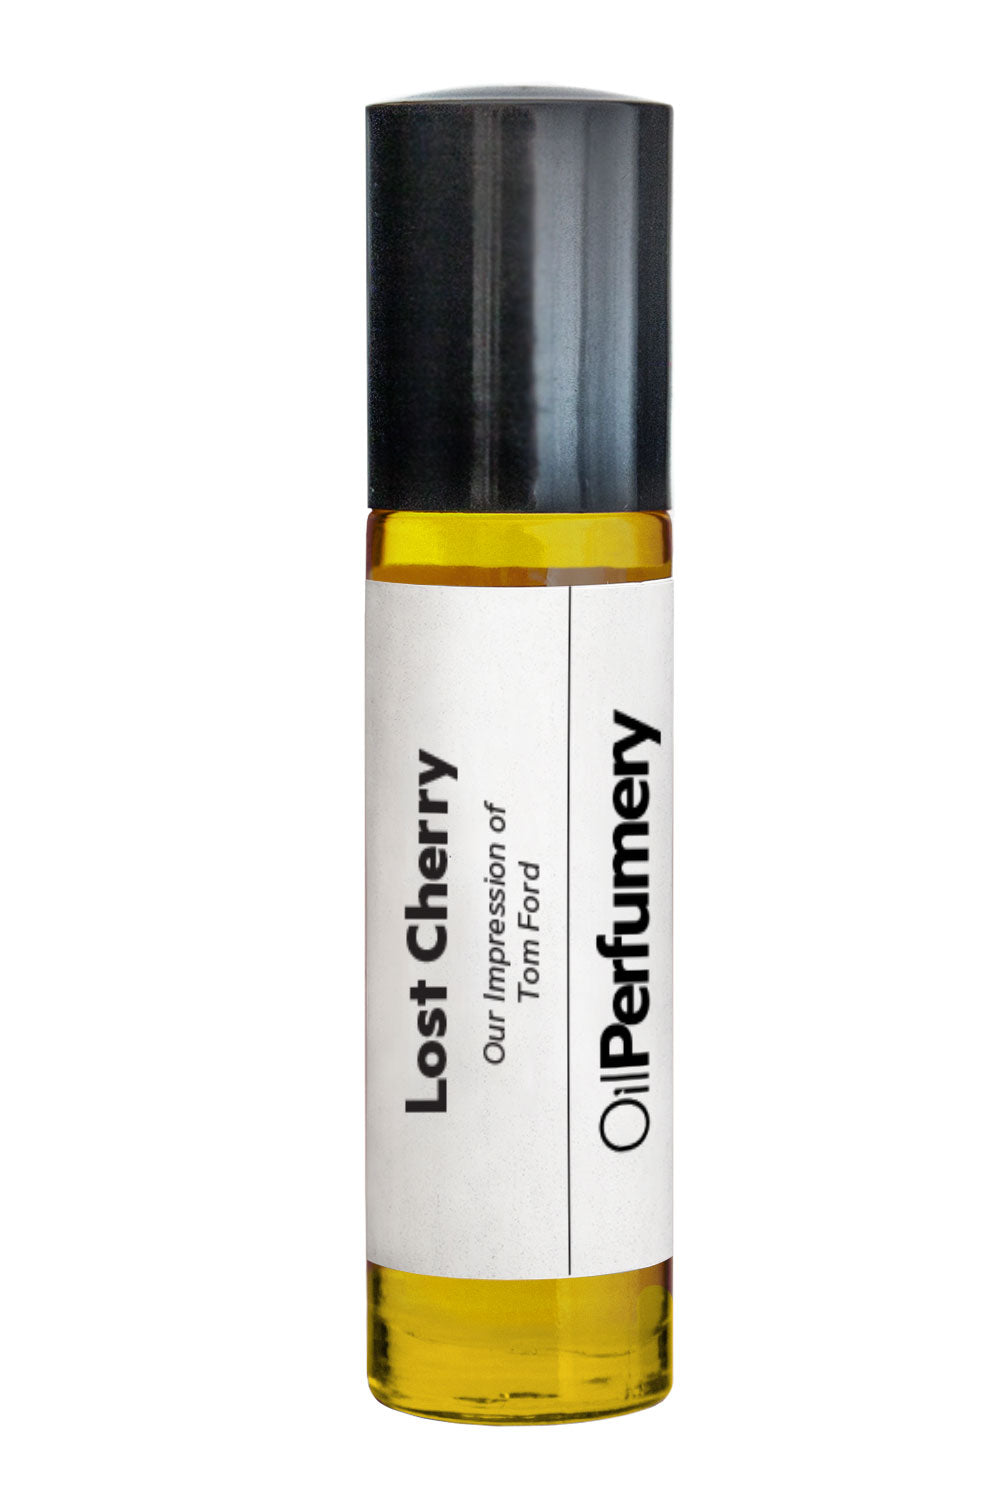  Aroma Depot Cherry Perfume/Body Oil (7 Sizes) Our  Interpretation, Premium Quality Uncut Fragrance Oil (1 Bottle 1/3 Roll On  (10ml)) : Arts, Crafts & Sewing